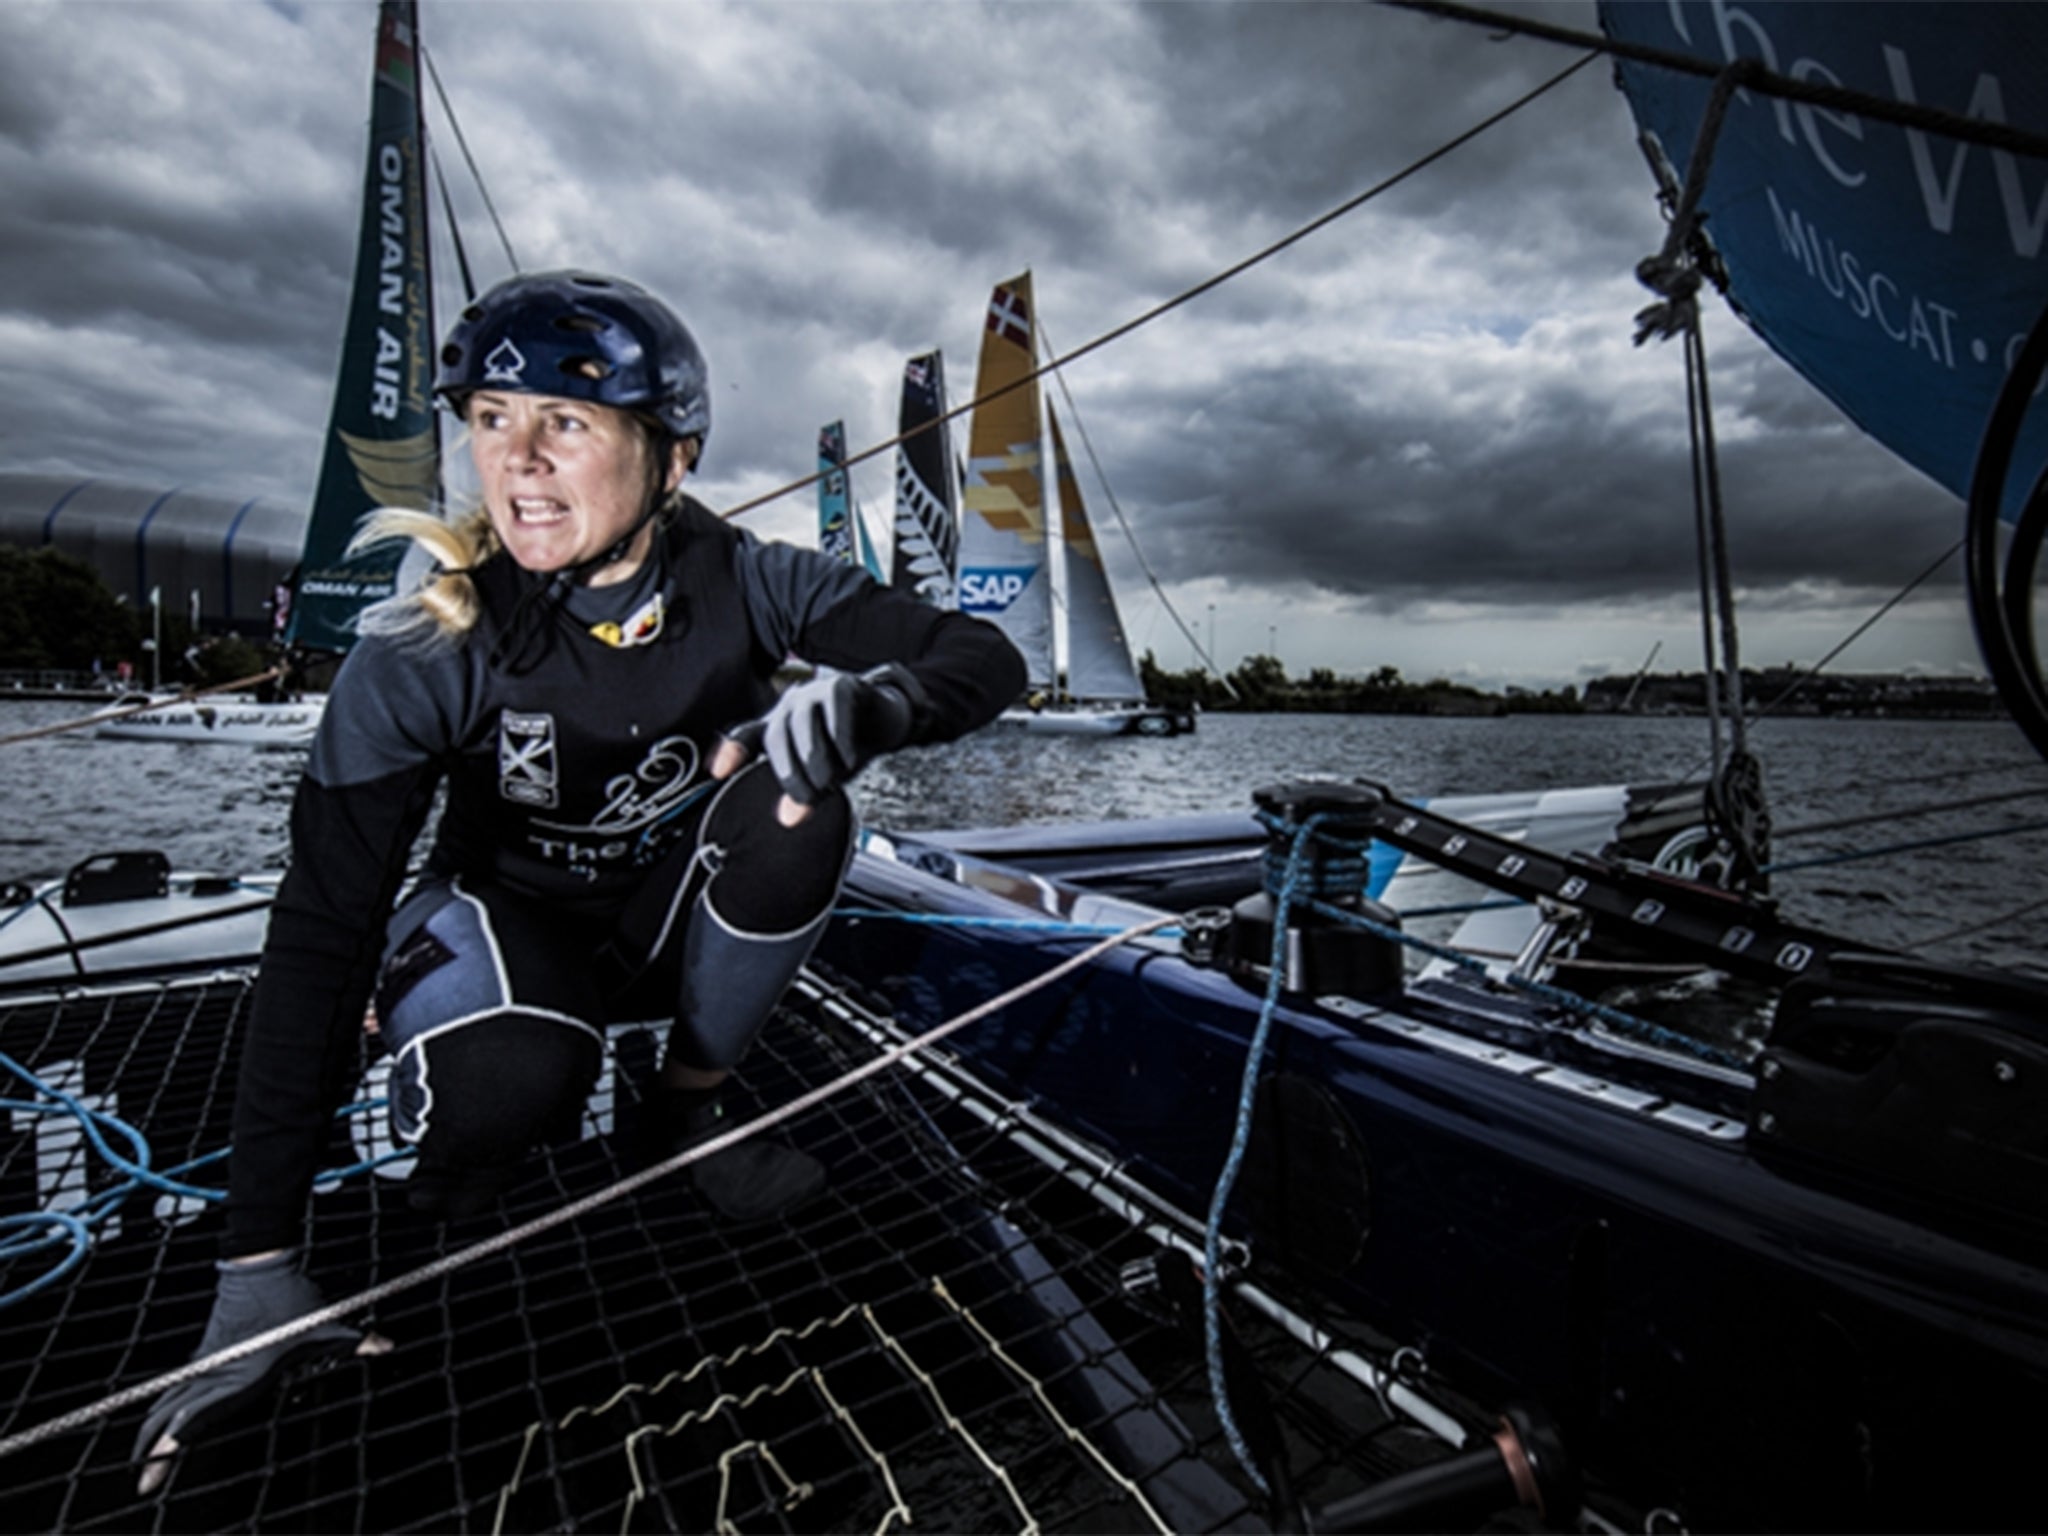 Double gold medallist Sarah Ayton crewed The Wave, Muscat to top spot at the halfway stage of the Extreme Sailing Series regatta in Istanbul